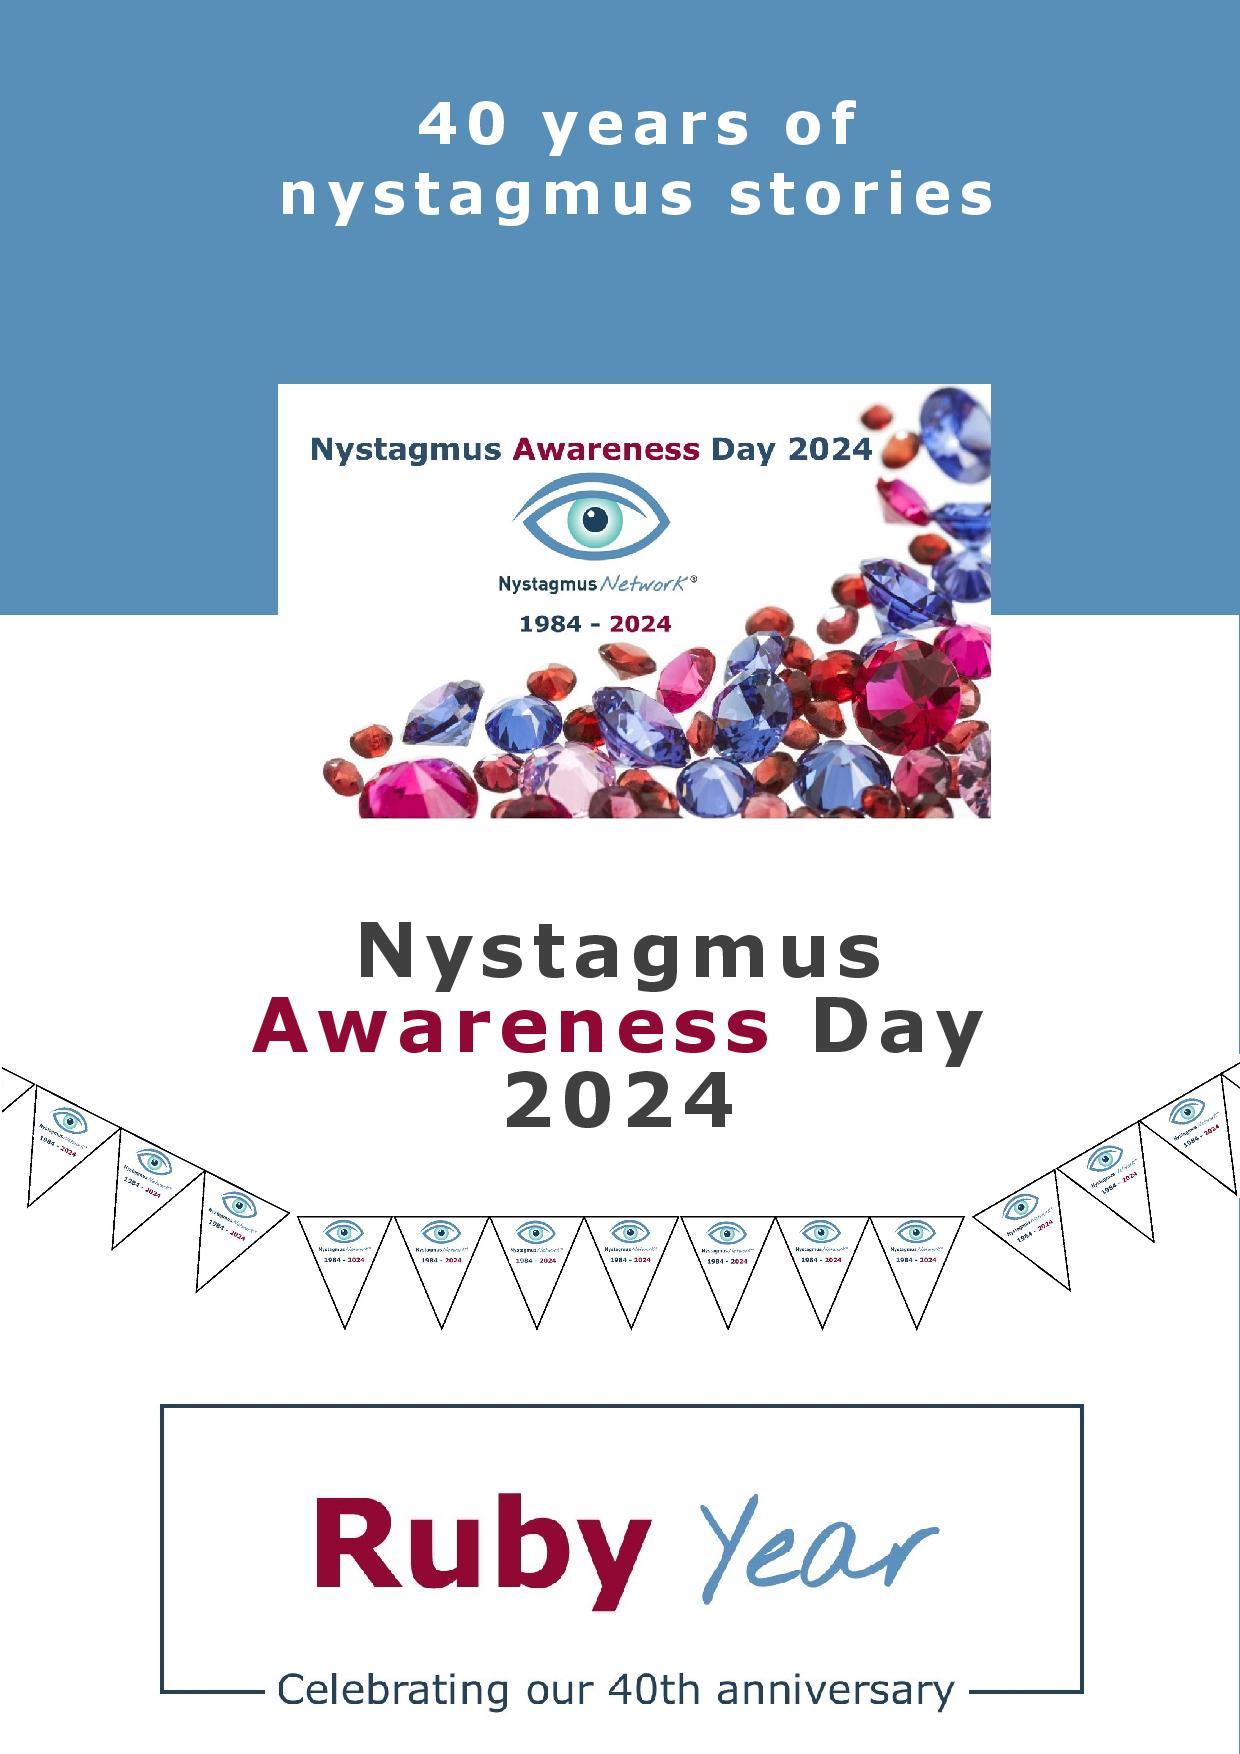 The front cover of the Nystagmus Awareness Day 2024 digital programme featuring the Ruby Year logo and a collection of blue and red gem stones.